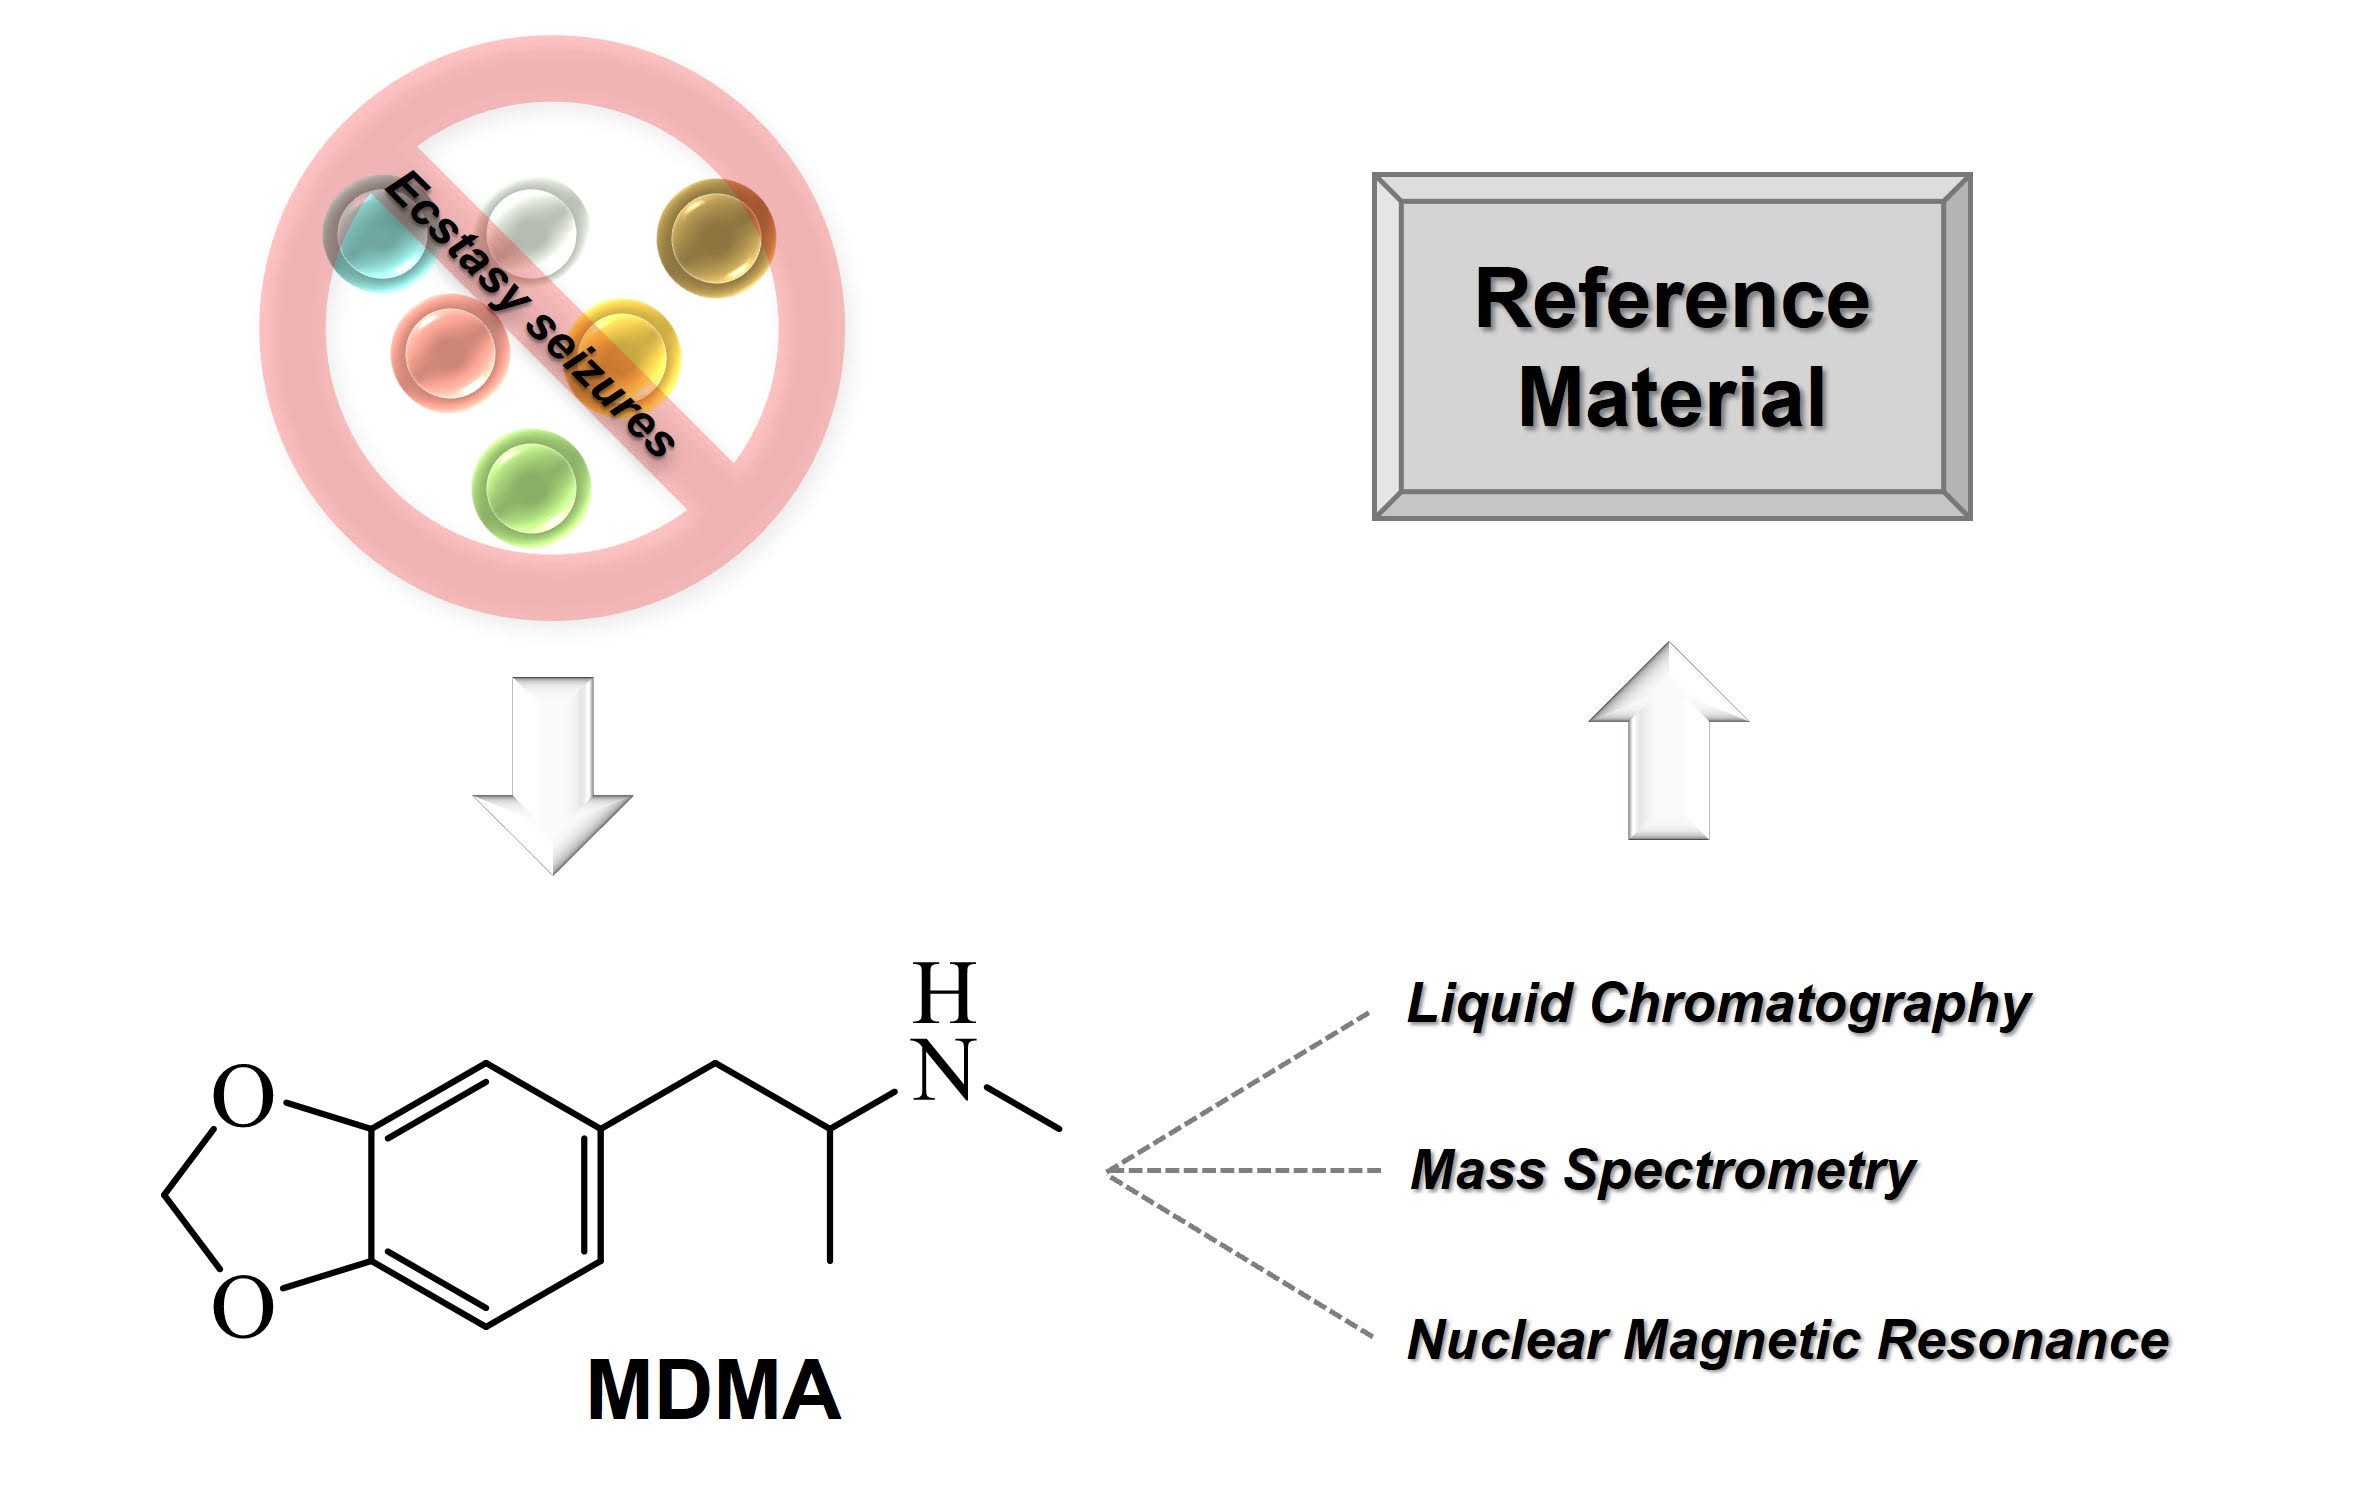 ISOLATION OF THE COMPOUND MDMA FOR APPLICATION AS A REFERENCE MATERIAL 